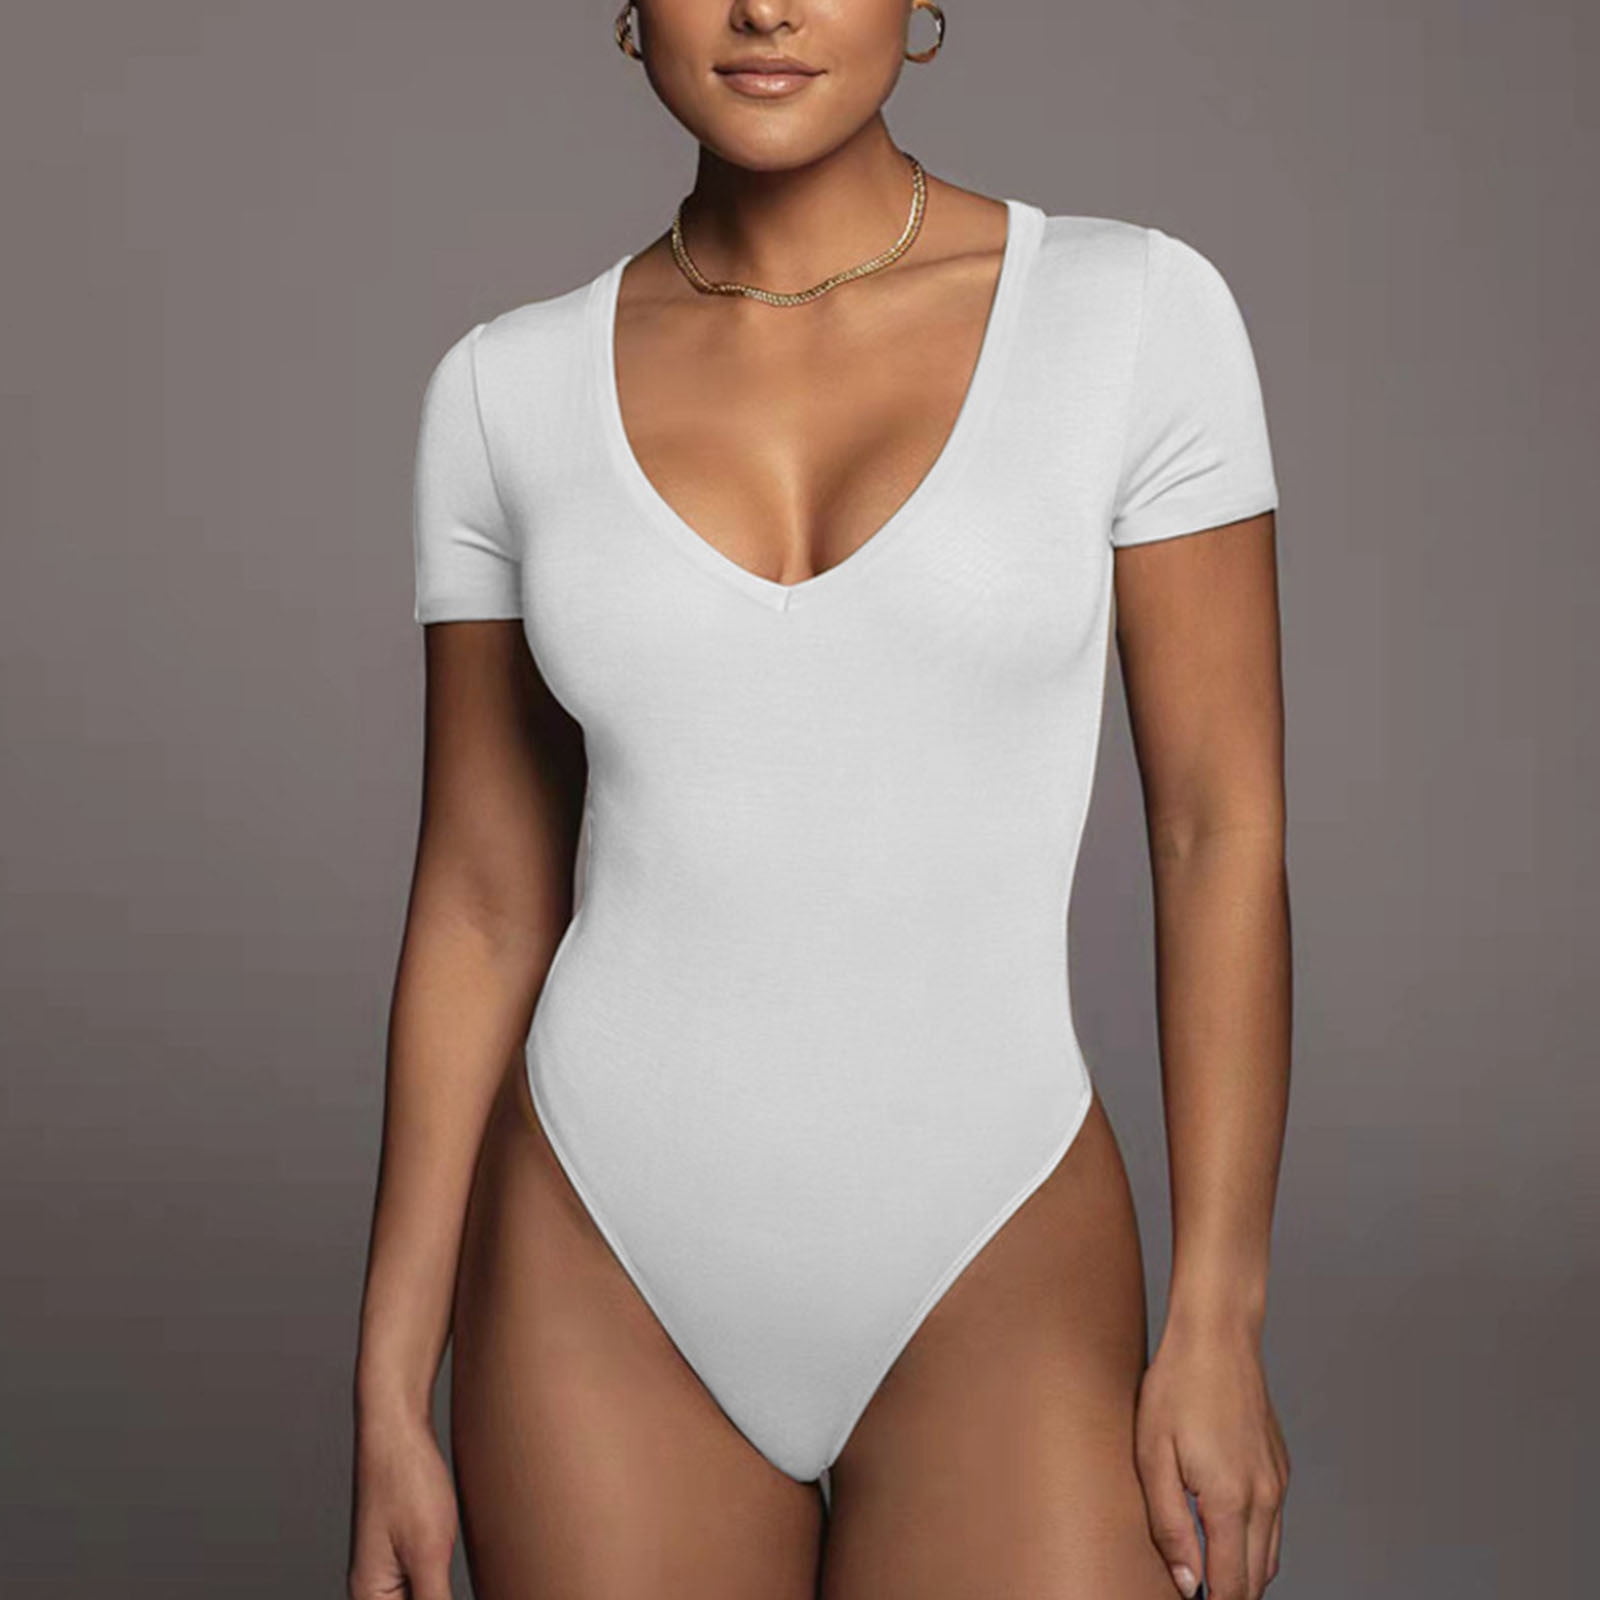 Womens Tummy Control Plunging Neckline Bodysuit With V/Scoop Neck Shirt  Short/Long Sleeve, Slim Fit For Going Out From Weilad, $25.1